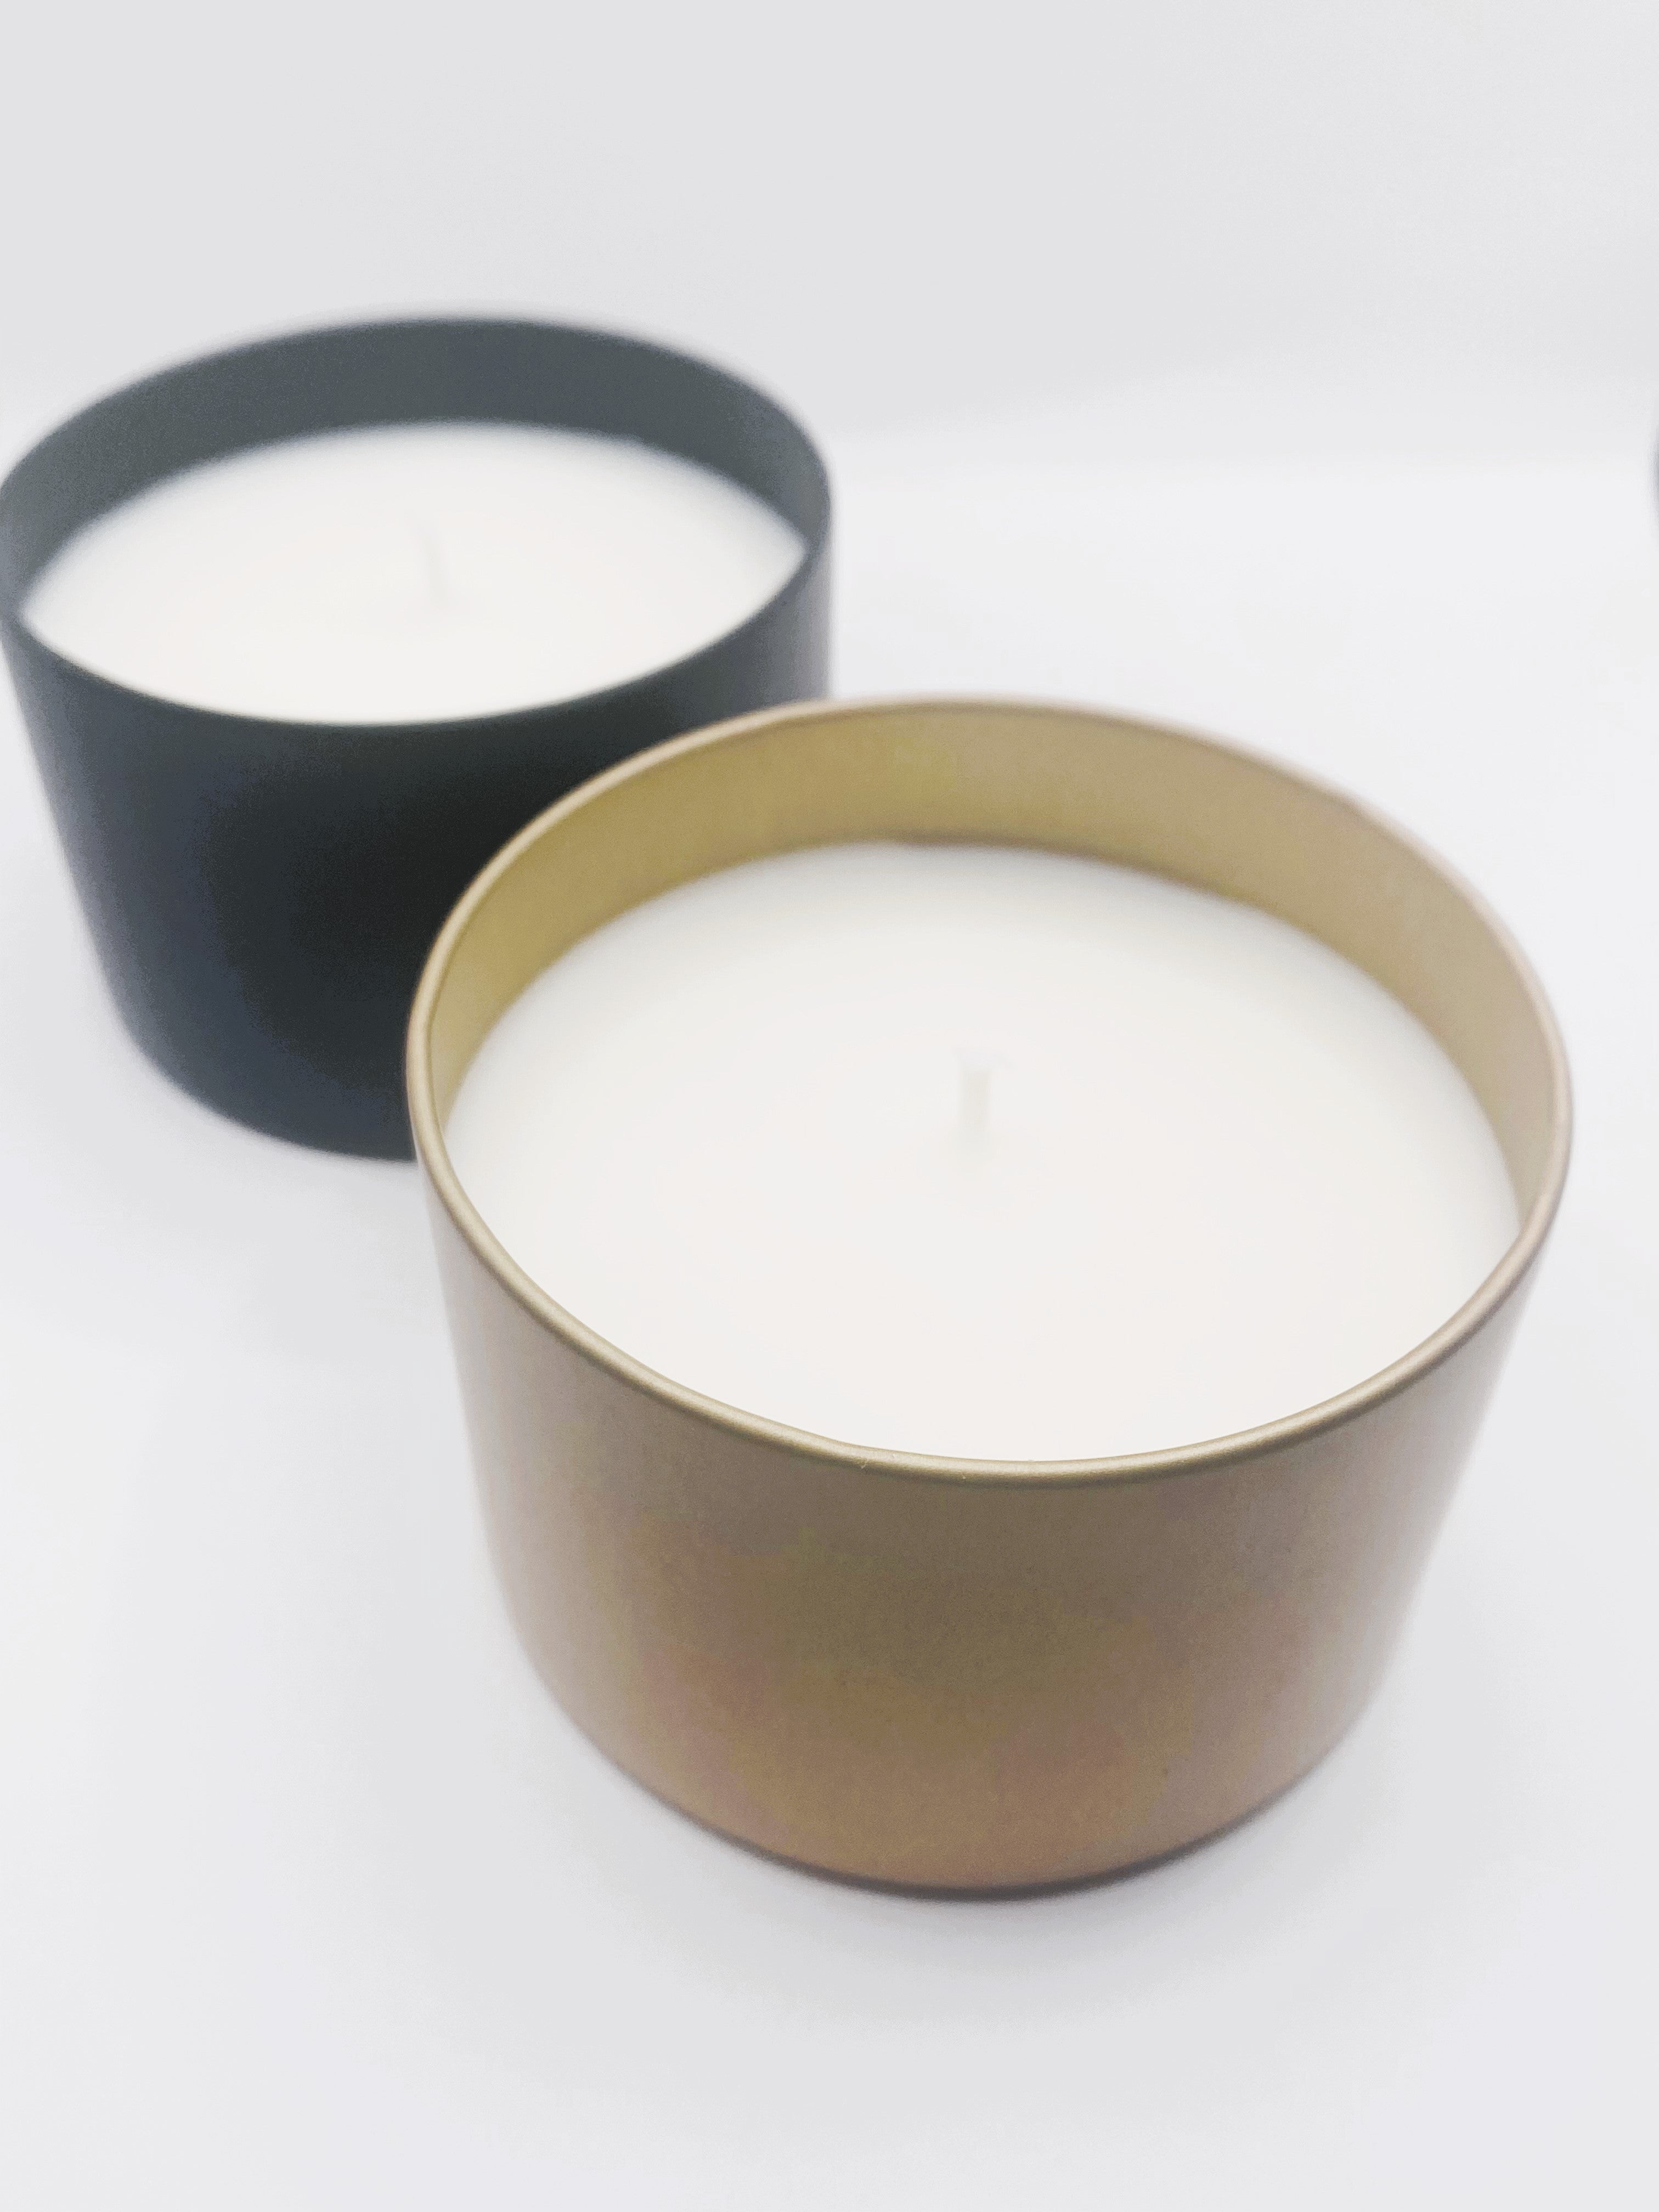 SALE -   FUN CANDLE WITH MYSTERY JEWELRY